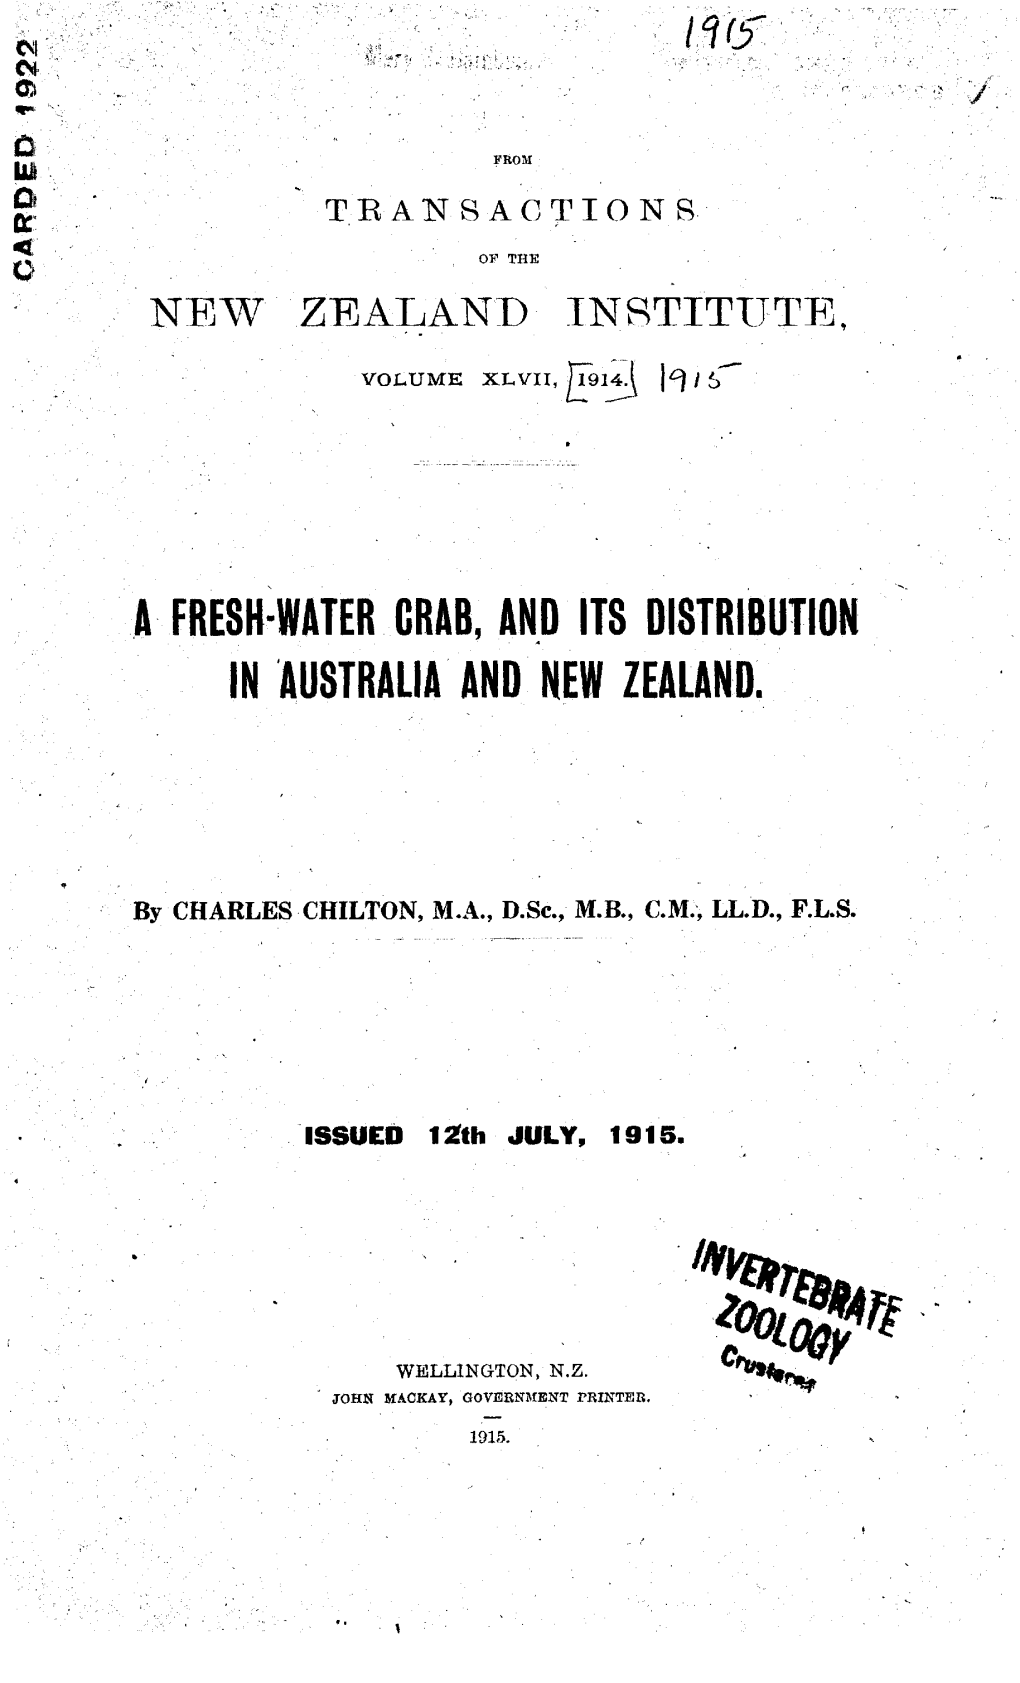 *?Cr a FRESH-WATER GRAB, and ITS DISTRIBUTION in AUSTRALIA